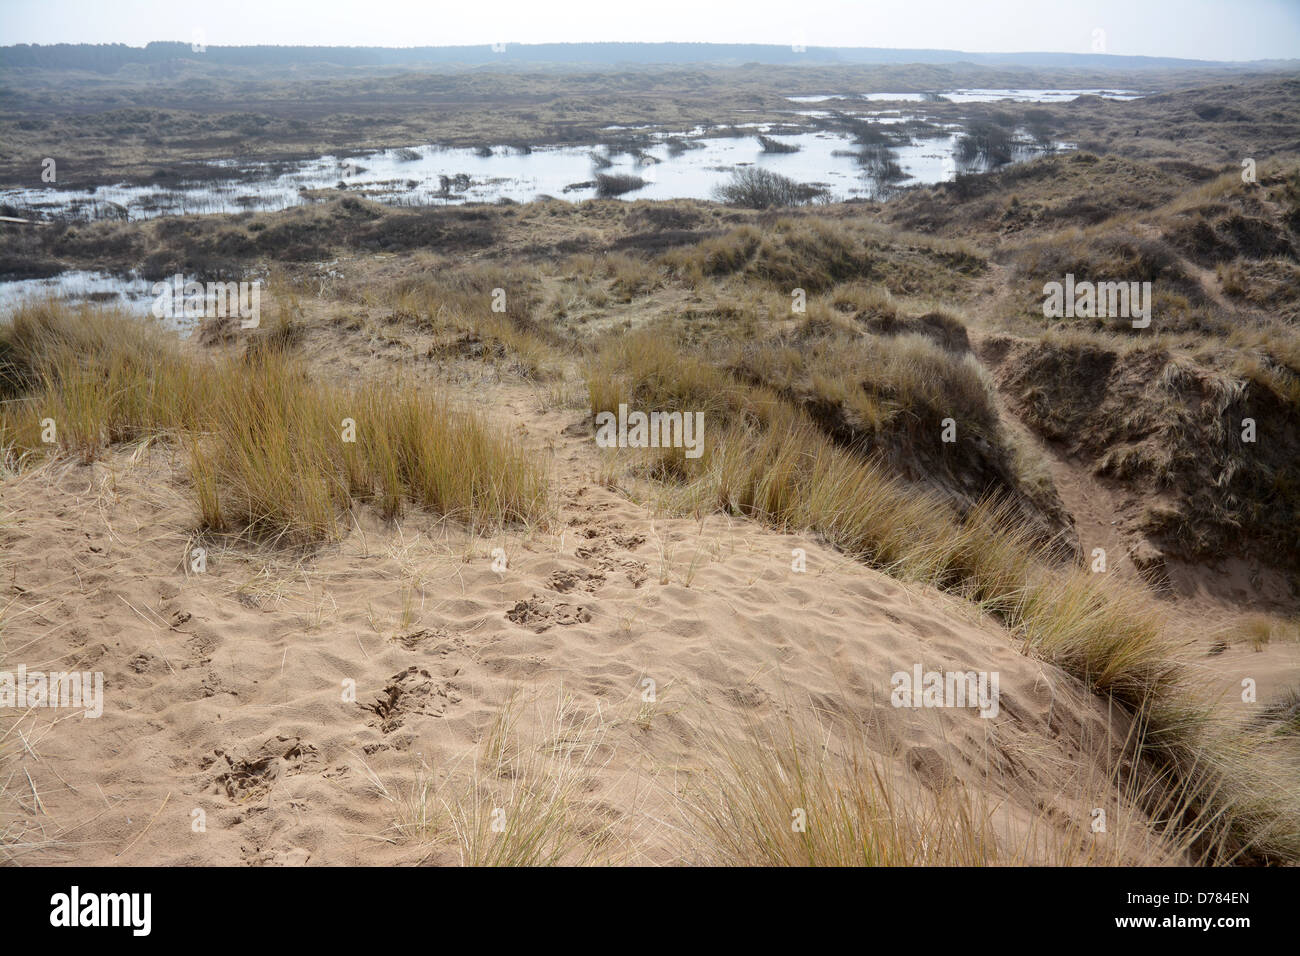 The Sefton Coast Special Area of Conservation covers 4,500 hectares of beach and dune habitats where seasonal ponds form Stock Photo